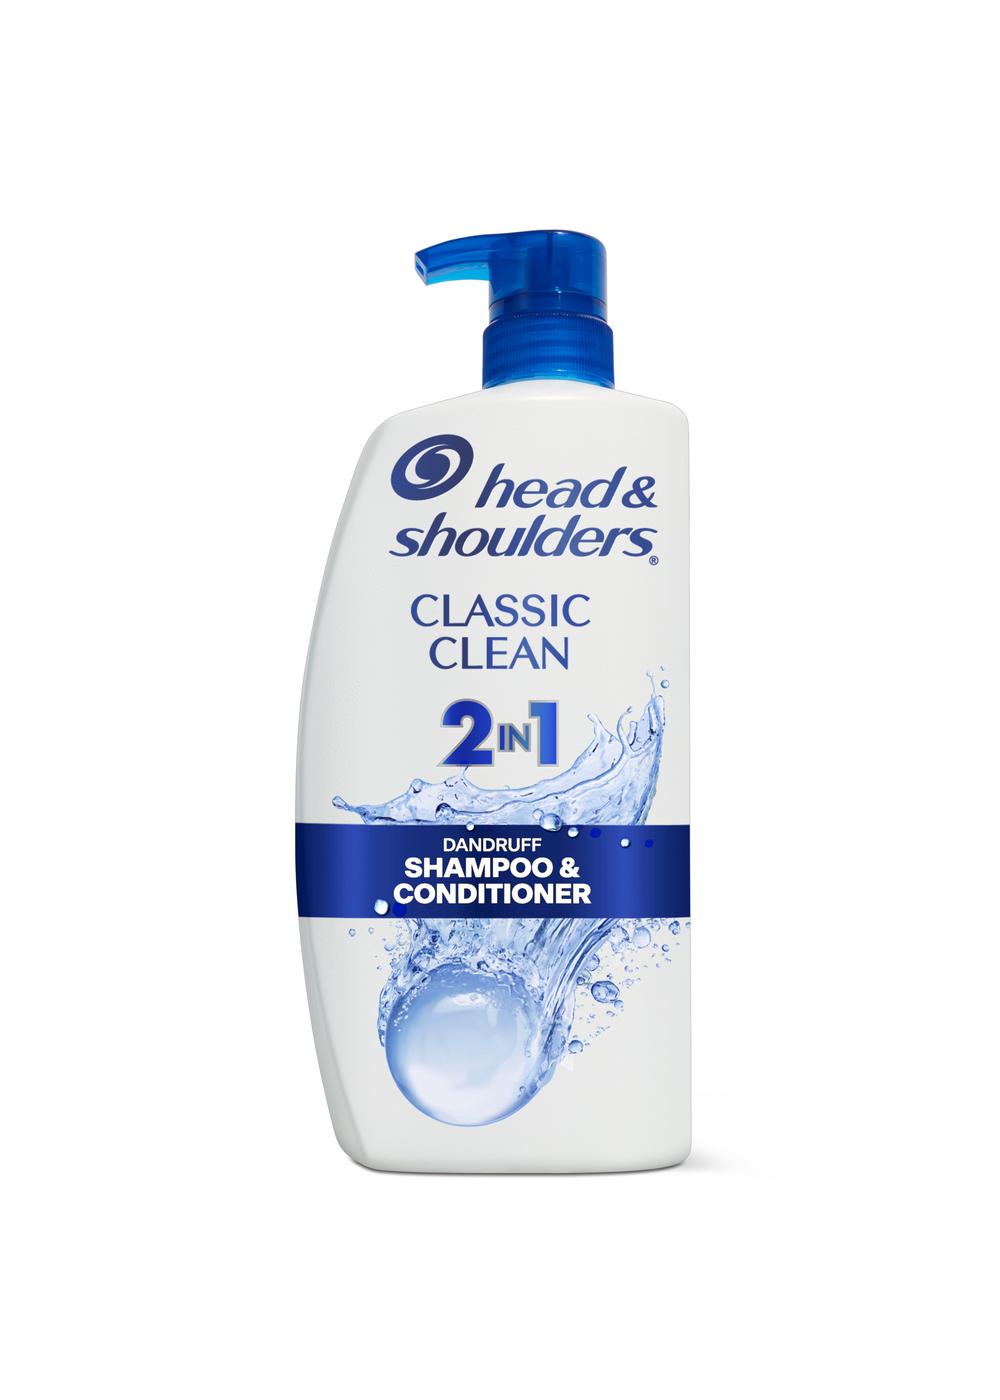 Head & Shoulders 2 in 1 Dandruff Shampoo + Conditioner - Classic Clean; image 4 of 11